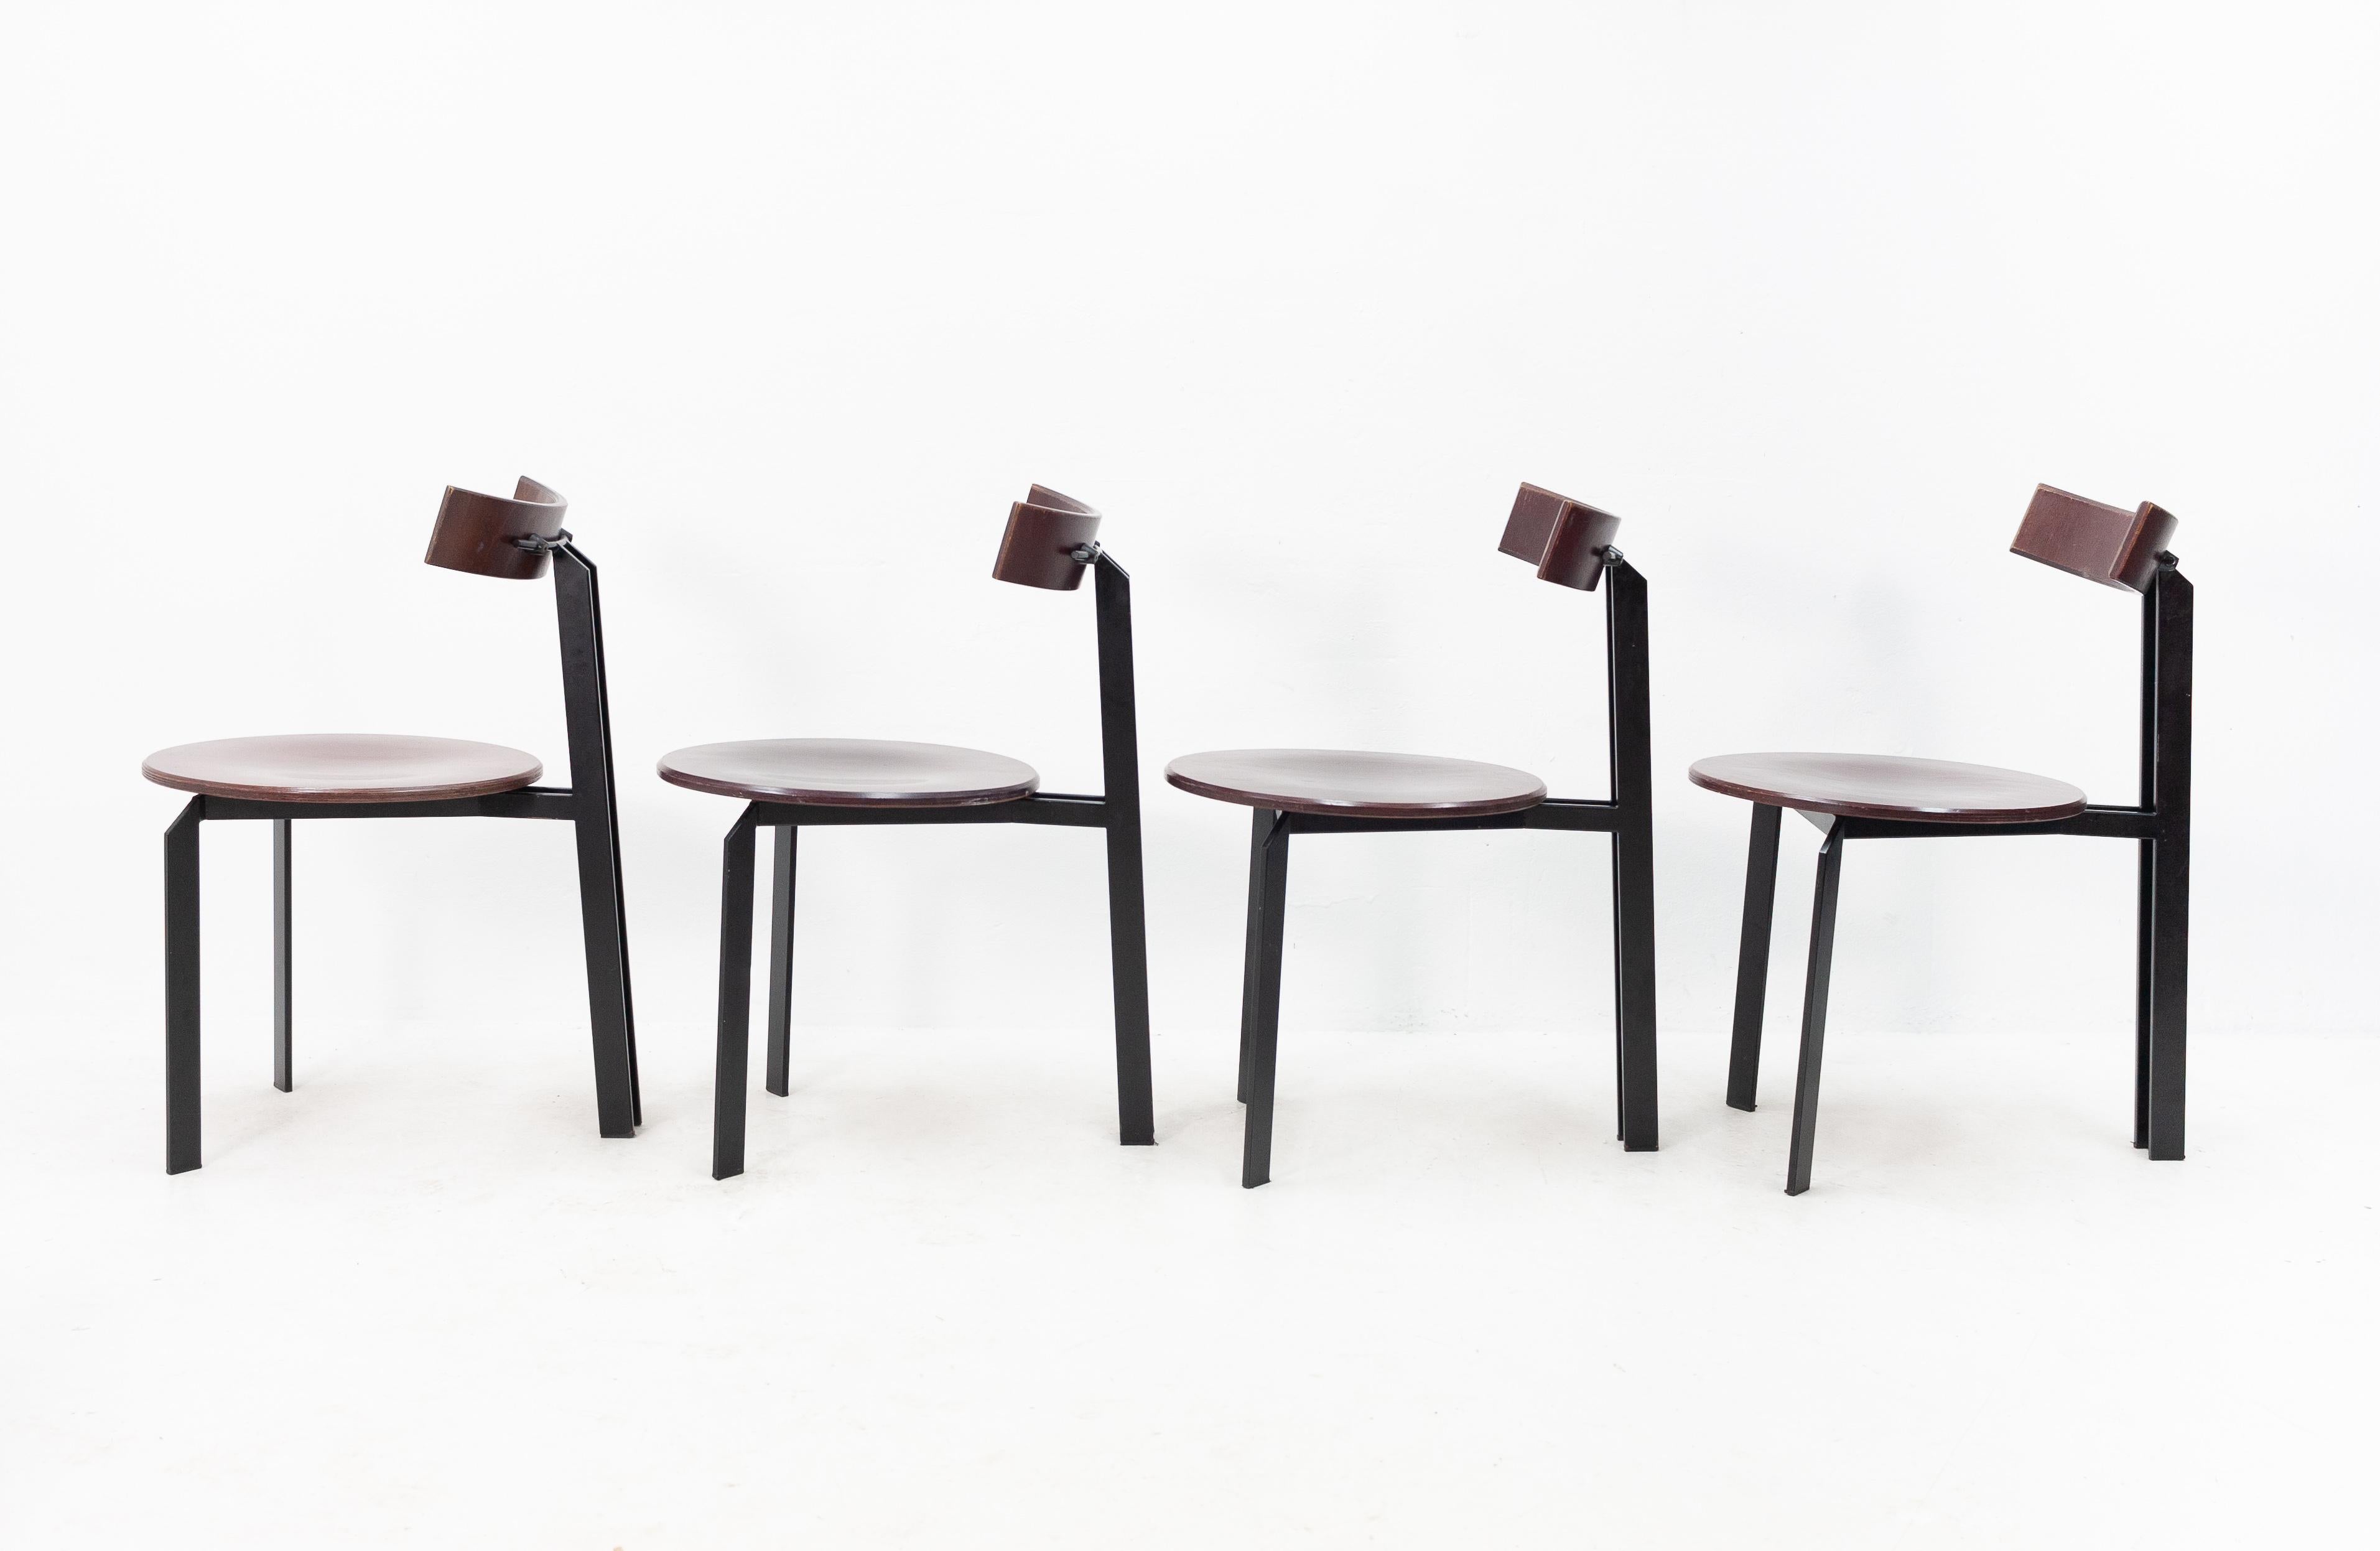 4 Harvink 'Zeta' dining chairs. Harvink Dutch design, 1980s. Three legs, steel frame with a solid wood seating and backrest.
Memphis style. In a dark purple color. Good condition.








